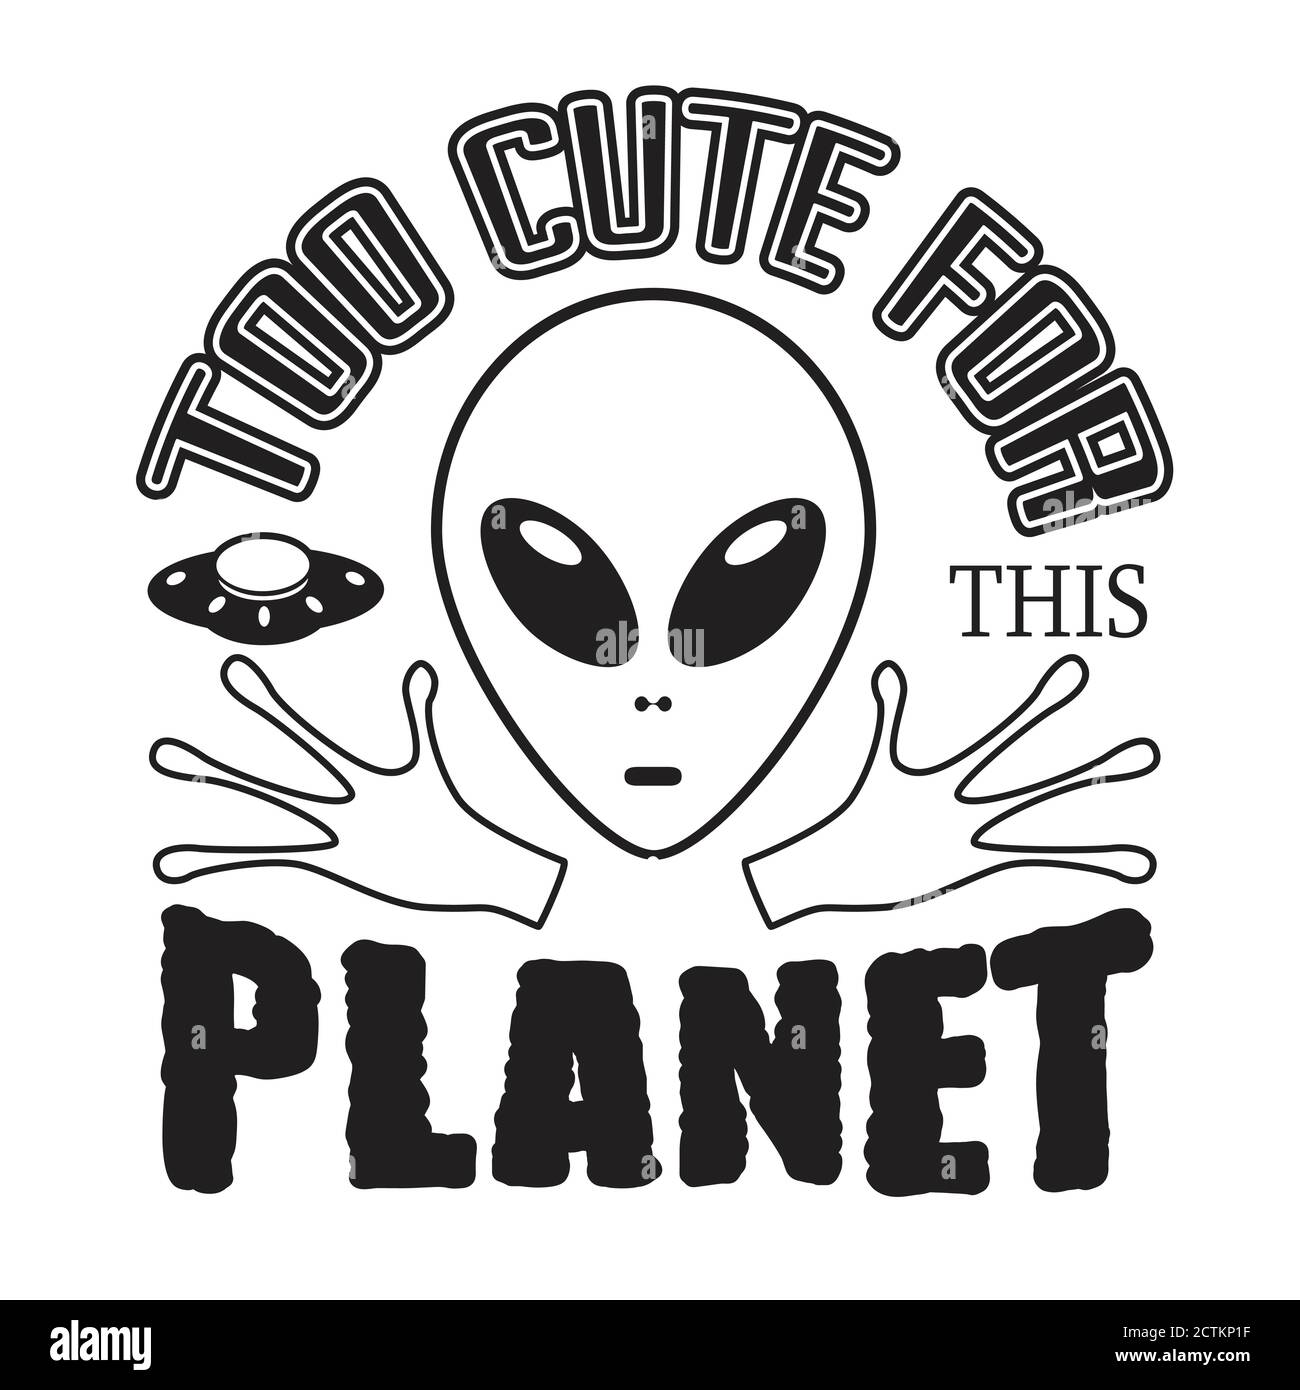 Aliens Quotes and Slogan good for T-Shirt. Too Cute for This ...